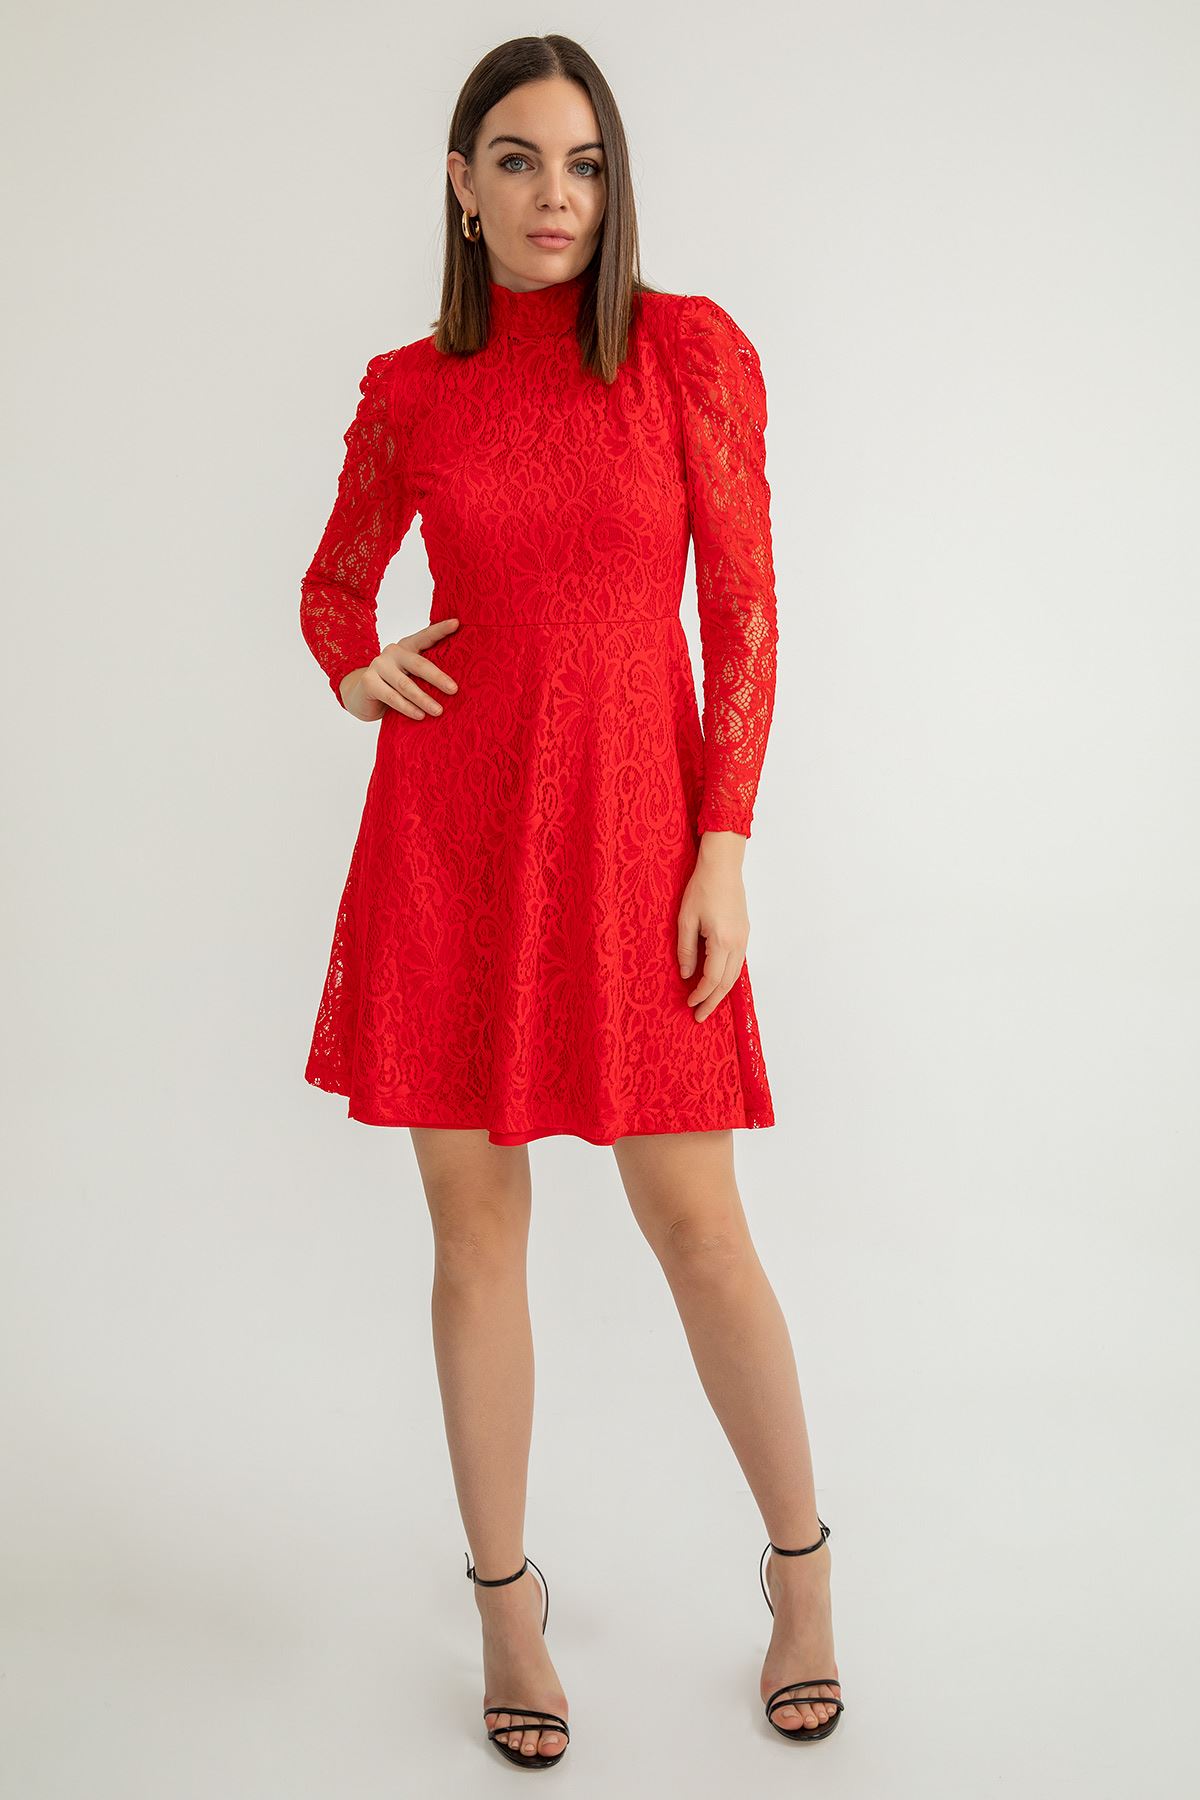 Lycra Fabric Ruffled Collar Lace Lined Above Knee Women Dress - Red